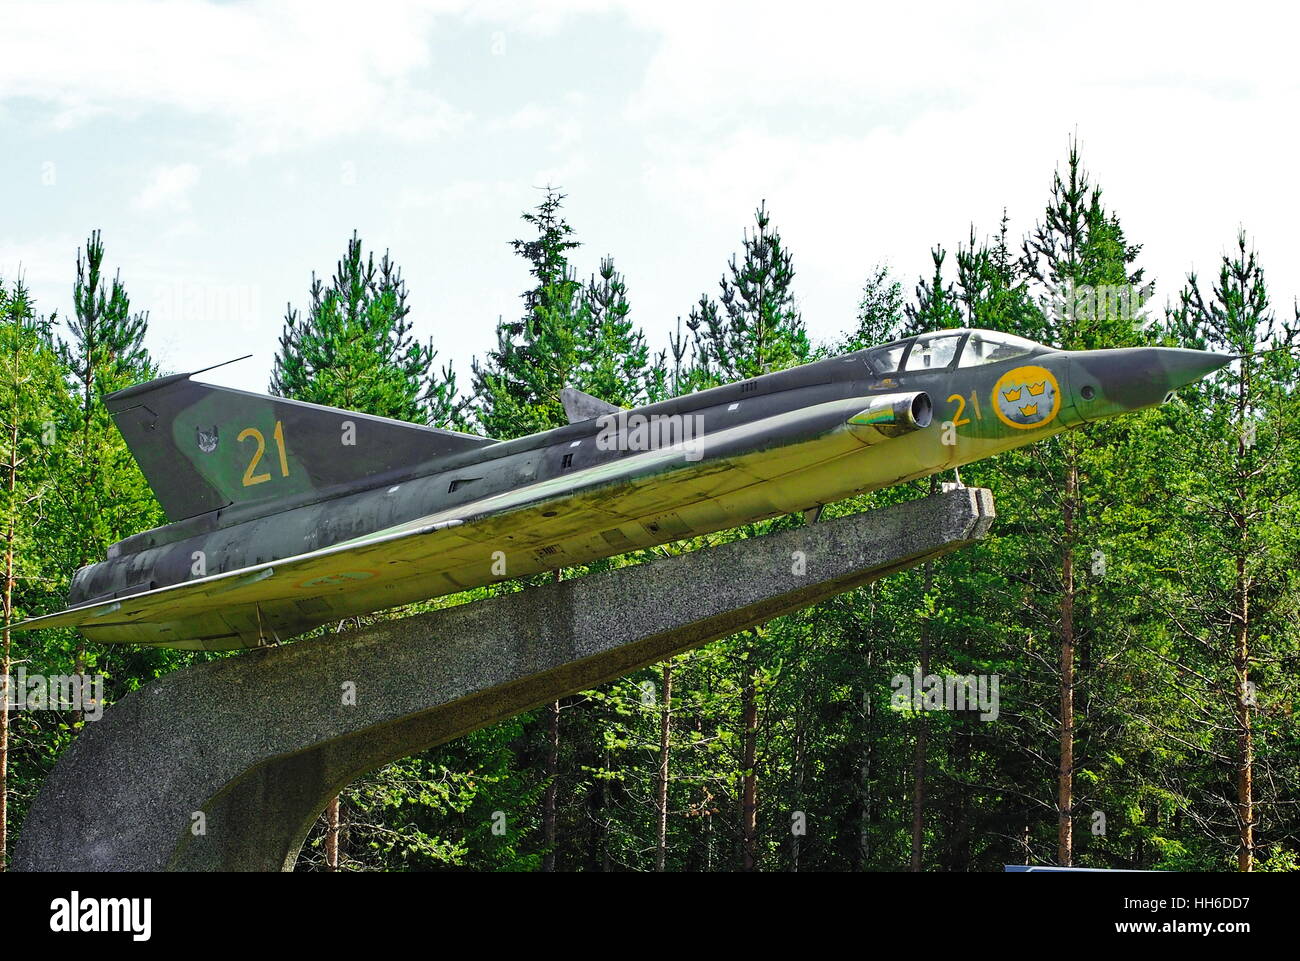 Luleå,Norrbotten/sweden-july 24 2015   J35 Draken a swedish jet fighter at the way to Luleå Airport. Stock Photo